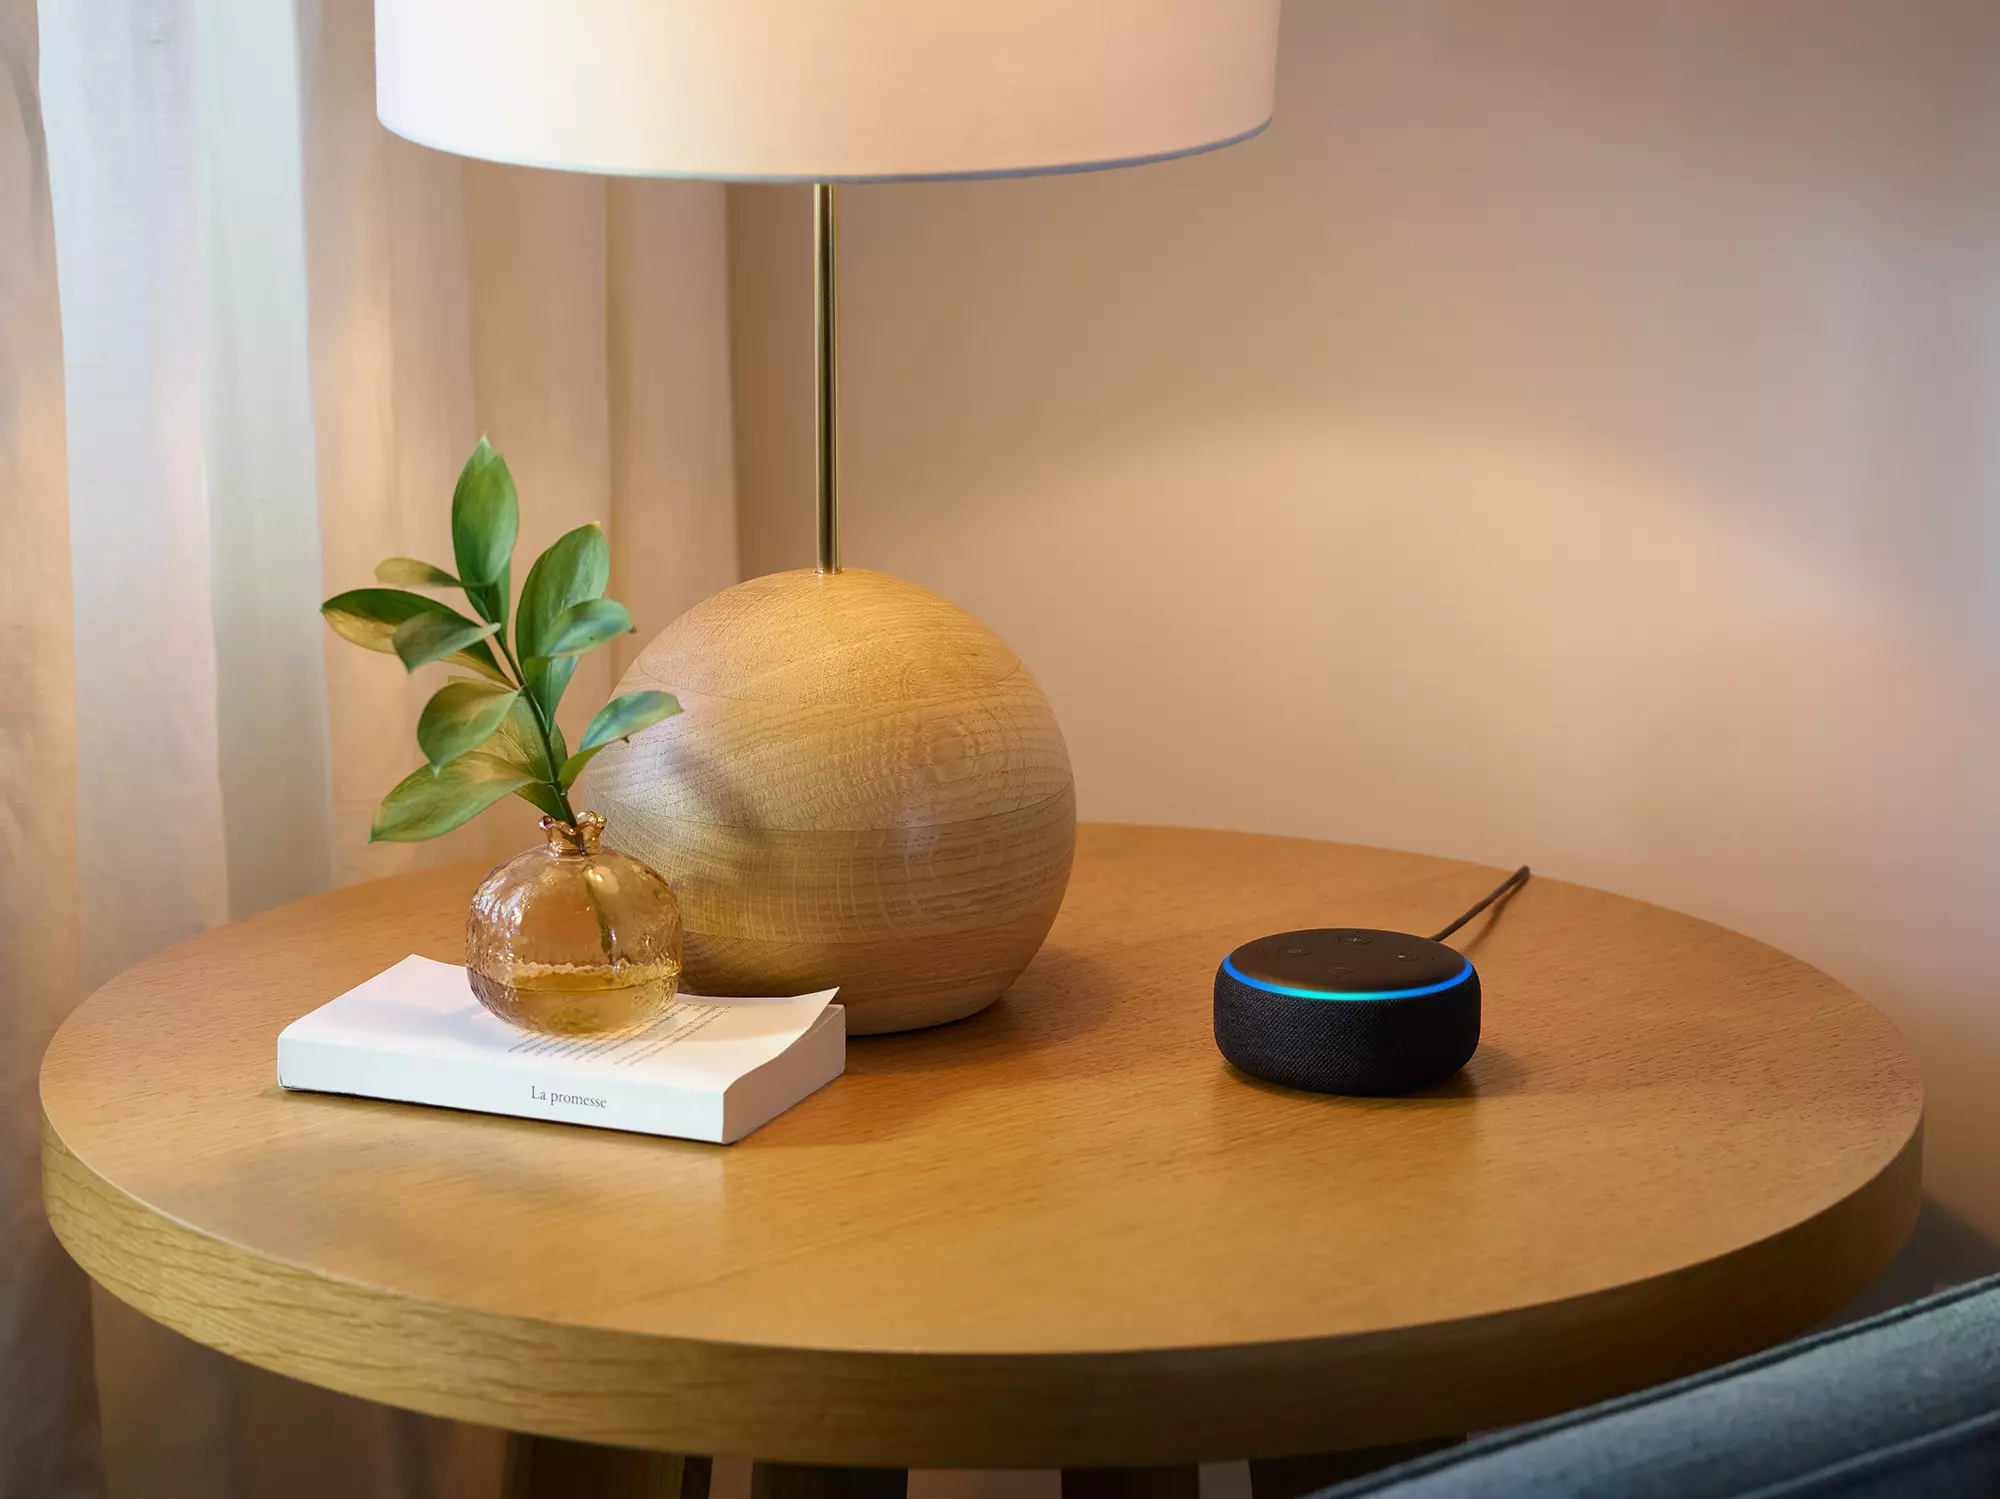 Amazon's Echo Dot 3rd Generation; deeply discounted for Prime Day.